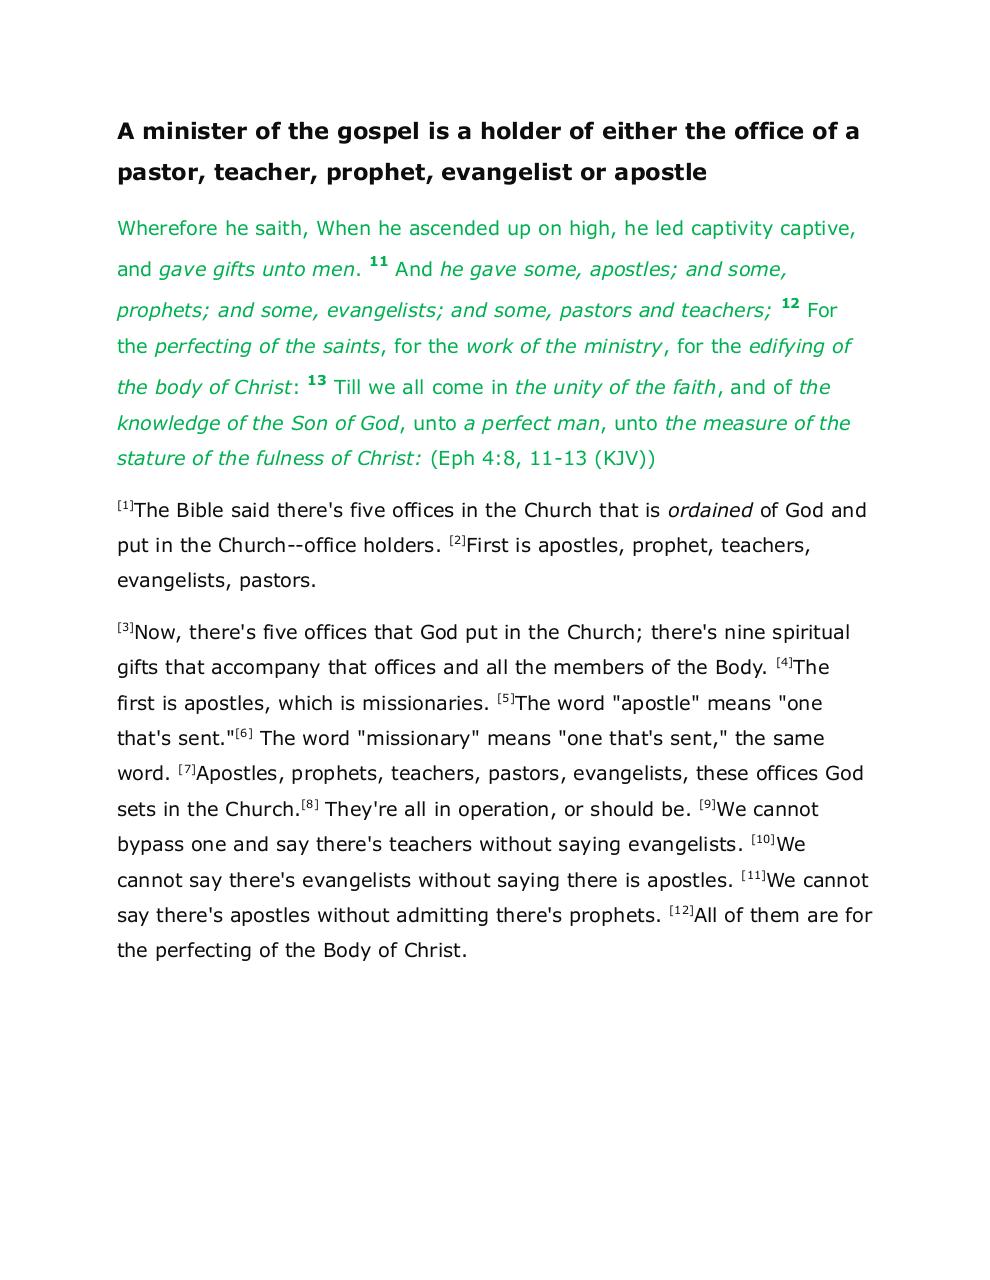 The Making Of A minister Of The Gospel.pdf - page 2/14